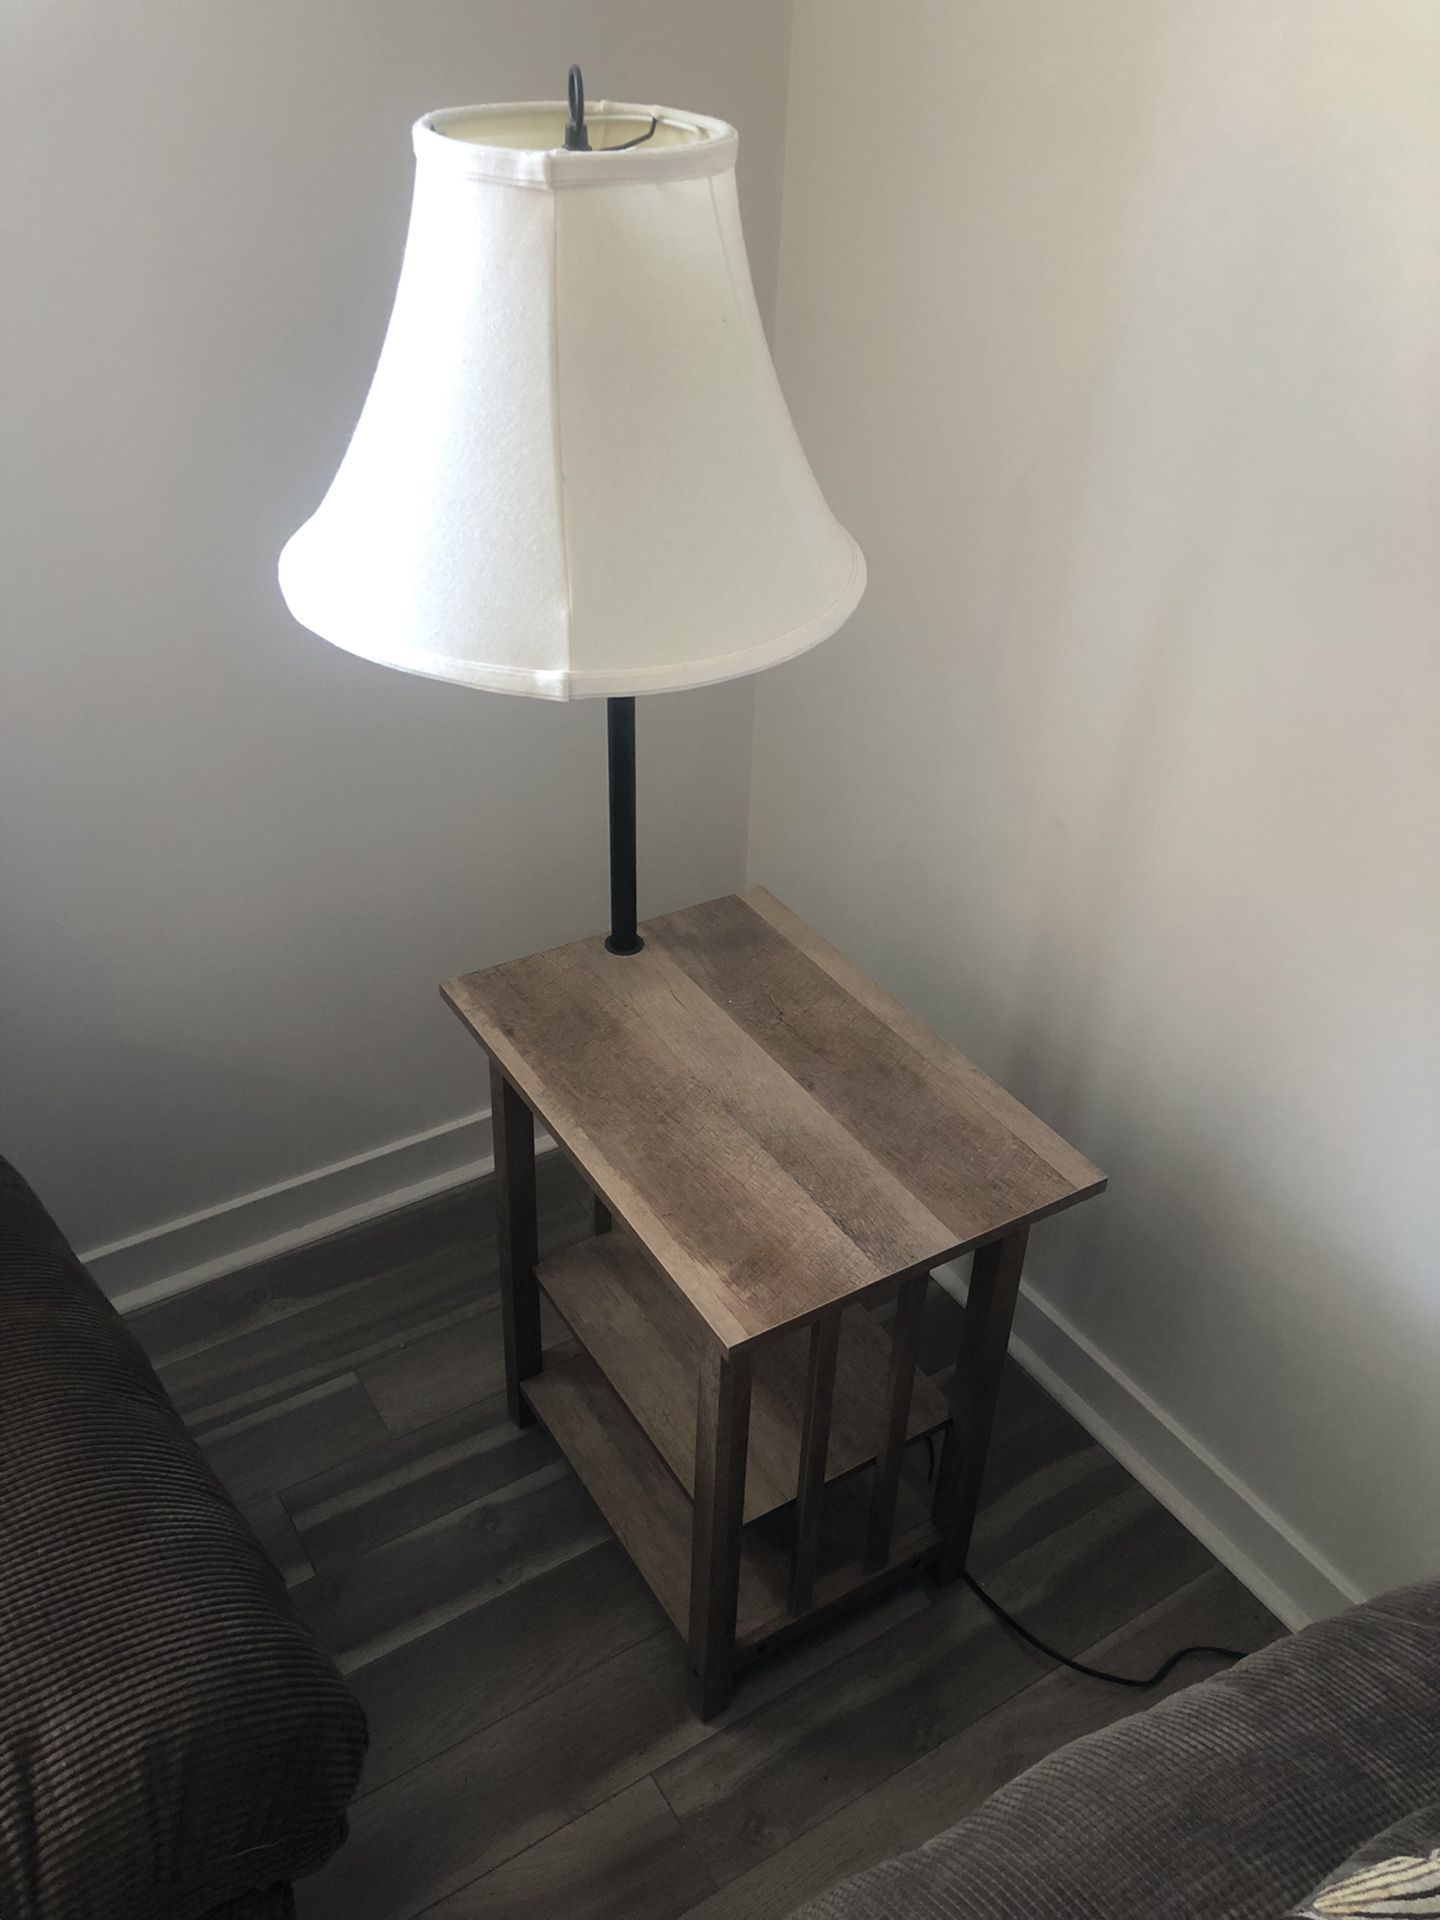 Small Table with Built-in Lamp